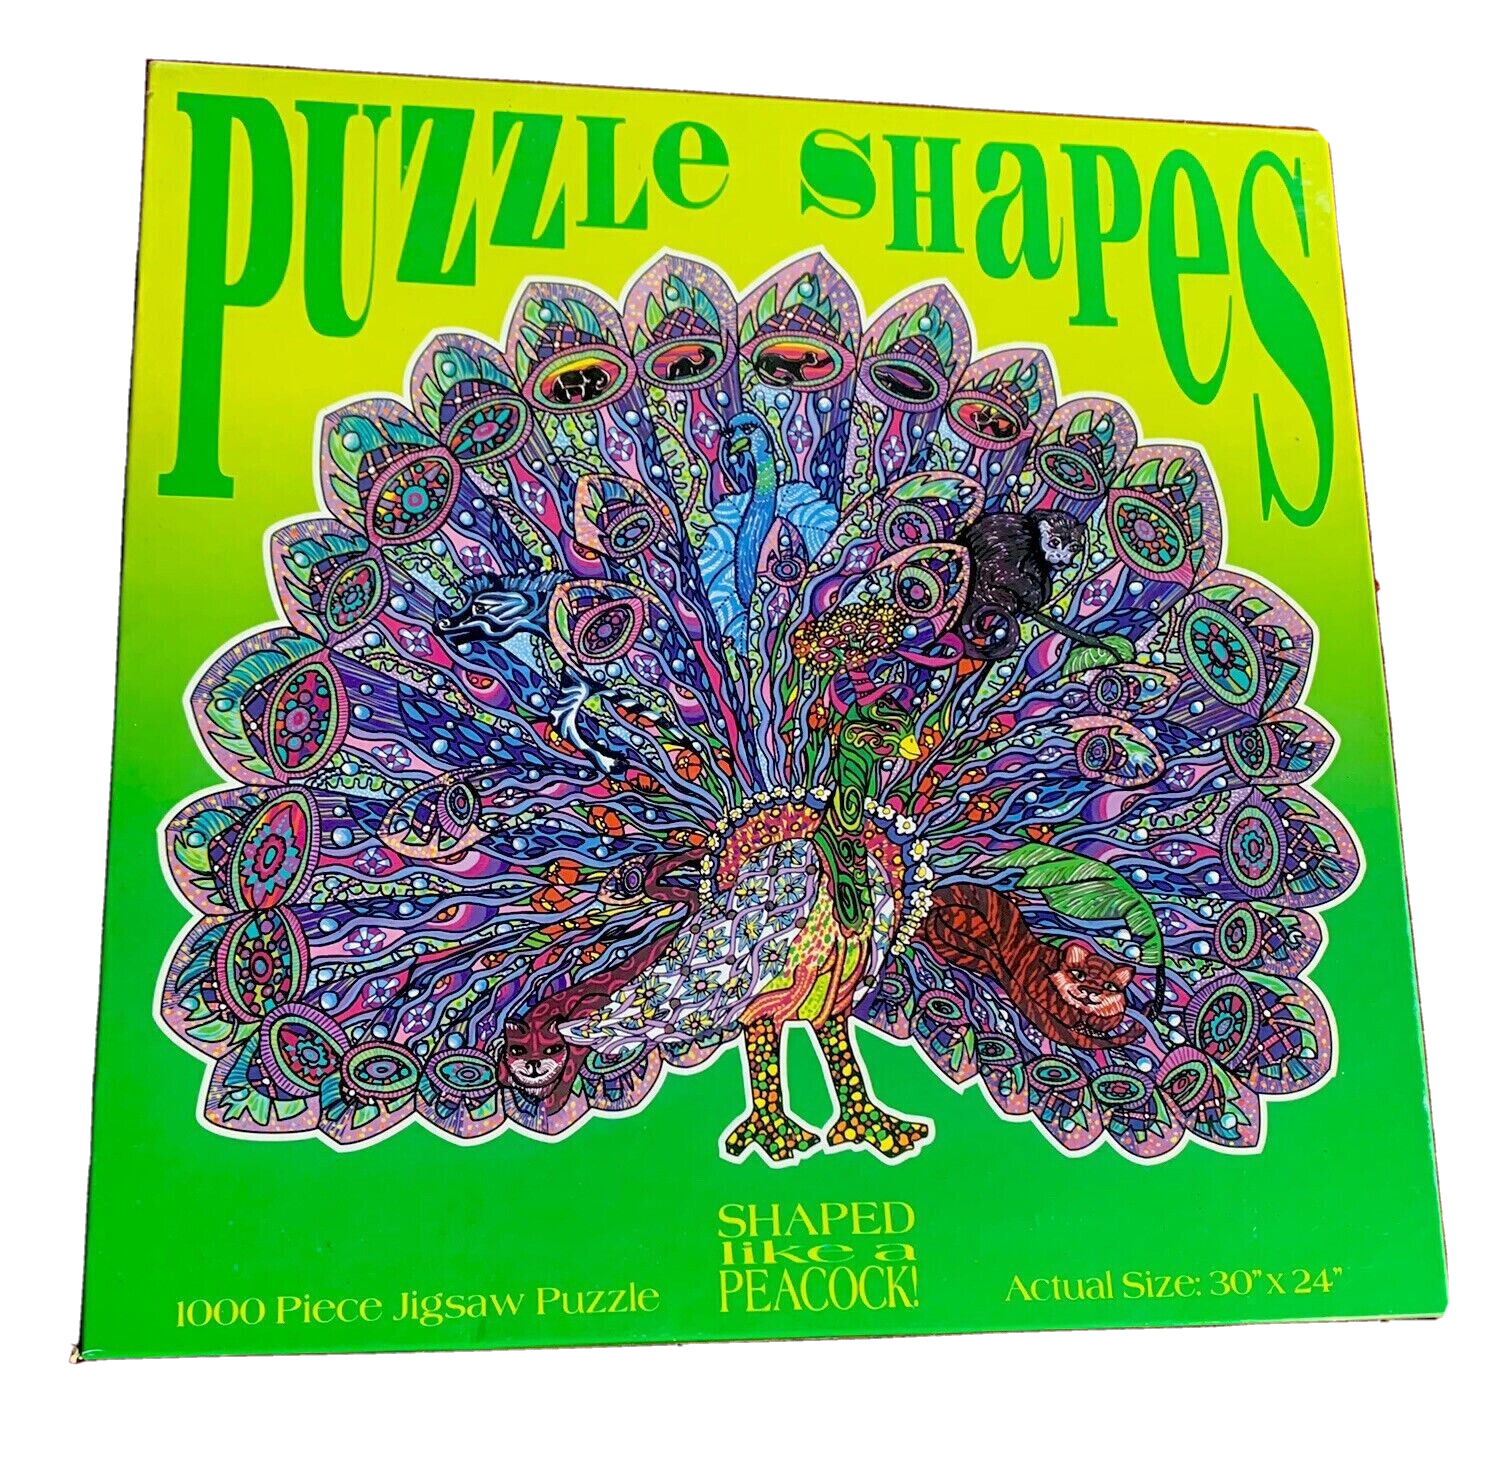 Primary image for Puzzle Shapes Shaped Like a Peacock! 1000 Piece Jigsaw Puzzle